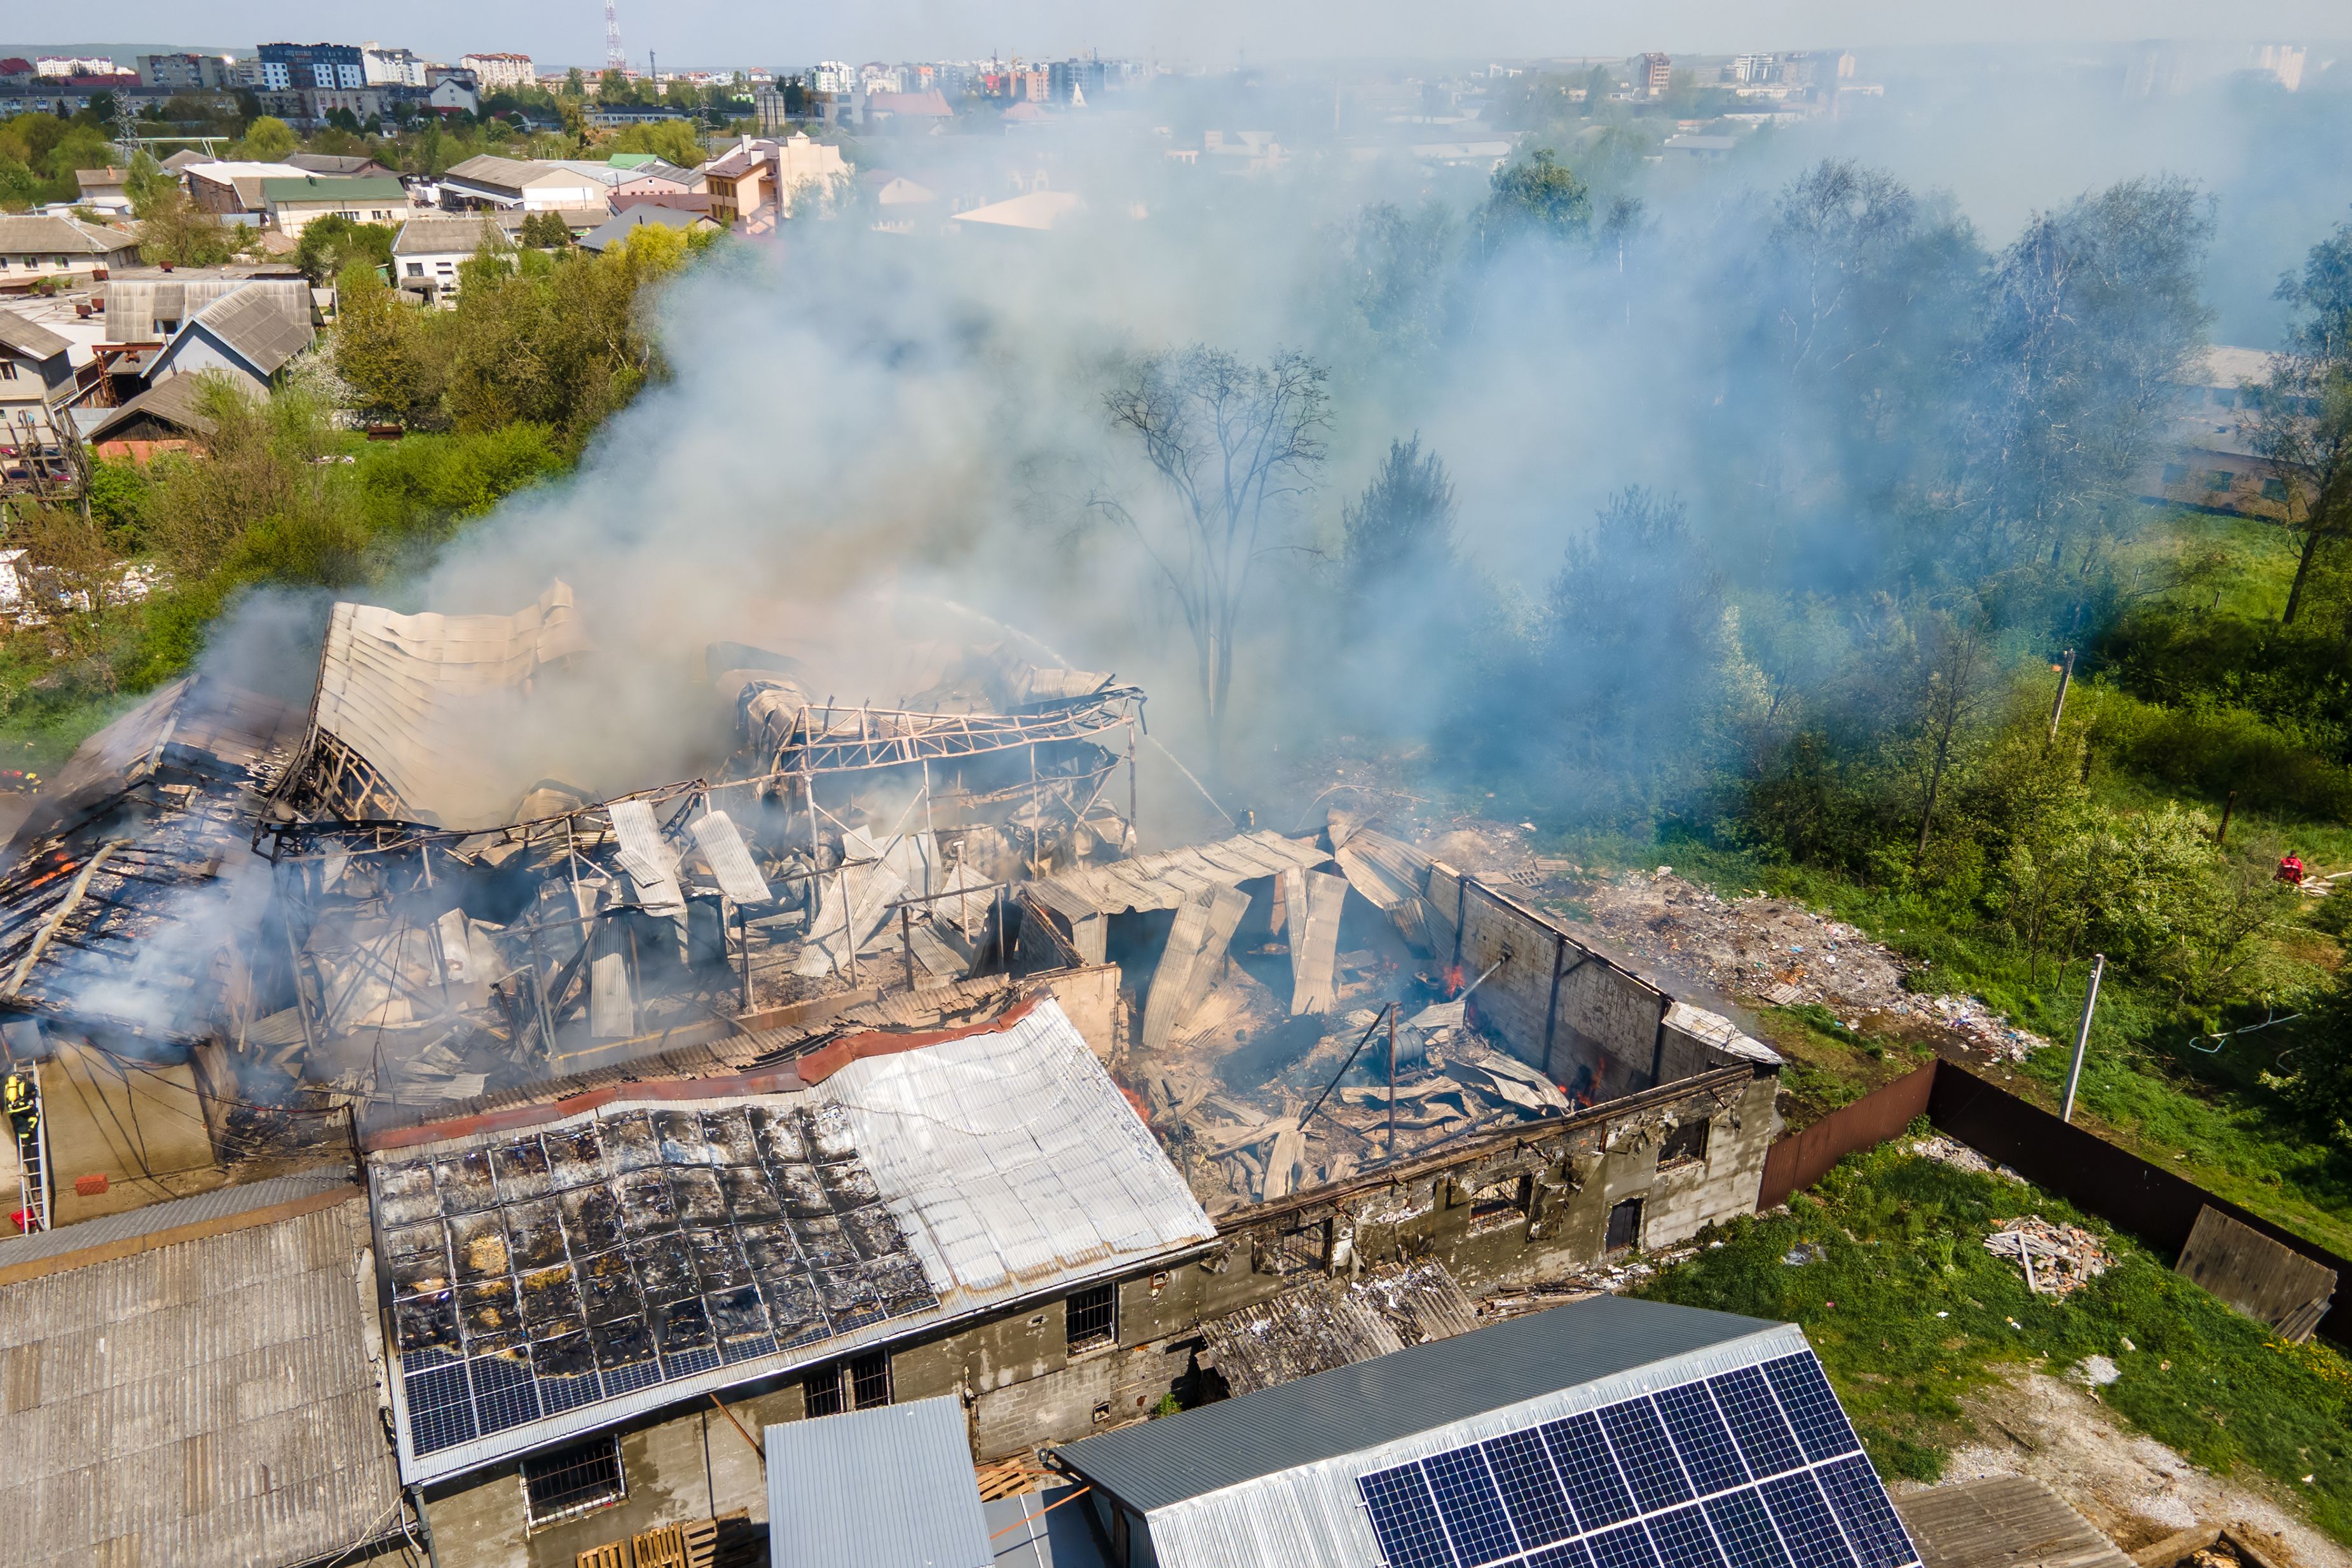 aerial-view-of-ruined-building-on-fire-with-collap-2023-11-27-04-57-21-utc.jpg